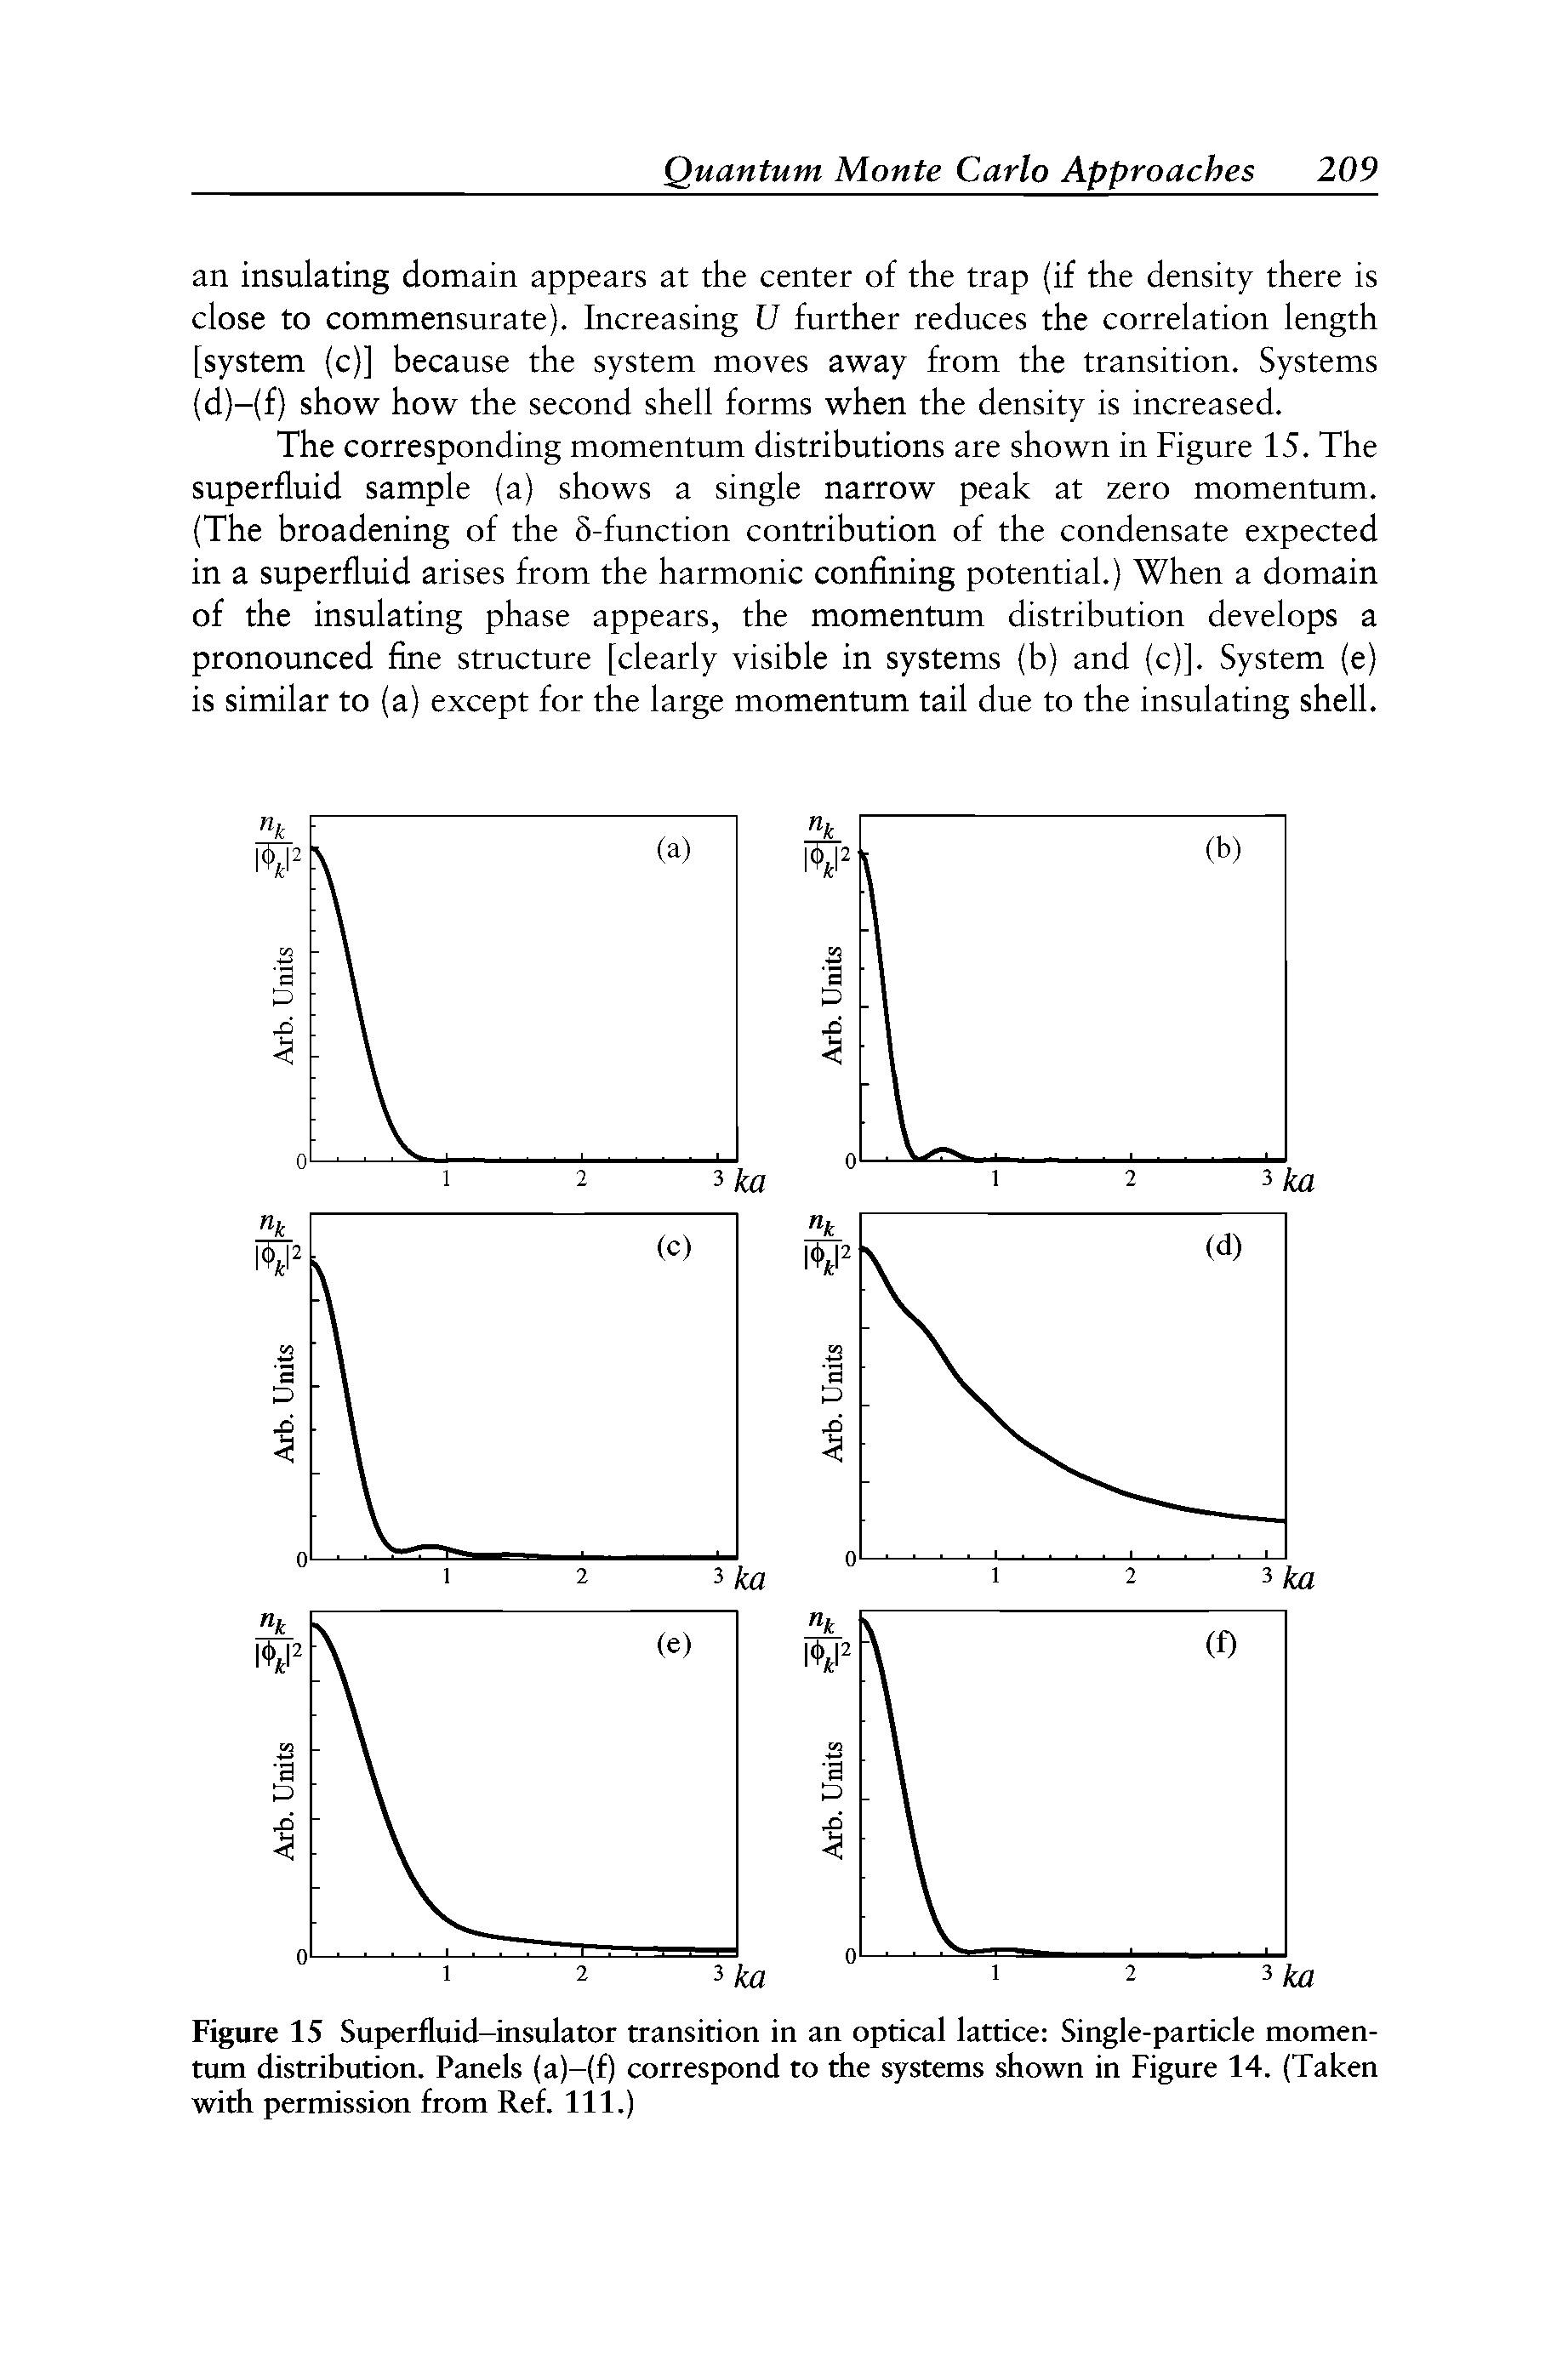 Figure 15 Superfluid-insulator transition in an optical lattice Single-particle momentum distribution. Panels (a)-(f) correspond to the systems shown in Figure 14. (Taken with permission from Ref. 111.)...